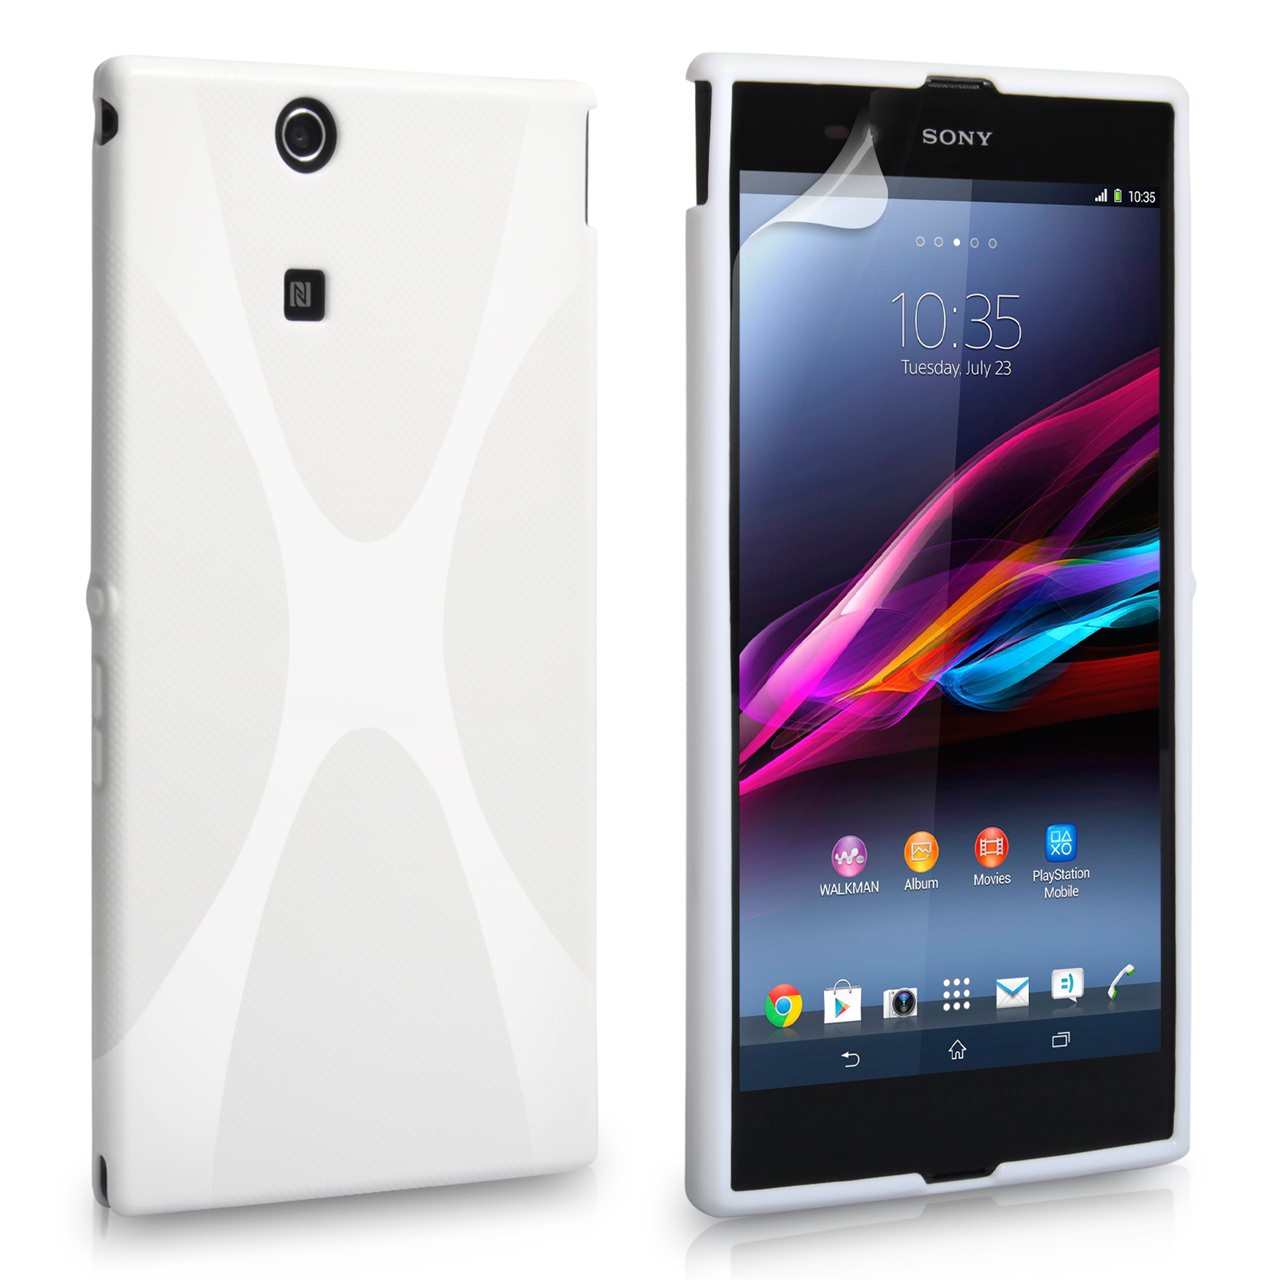 YouSave Accessories Sony Xperia Z Ultra X-line Gel Case - White